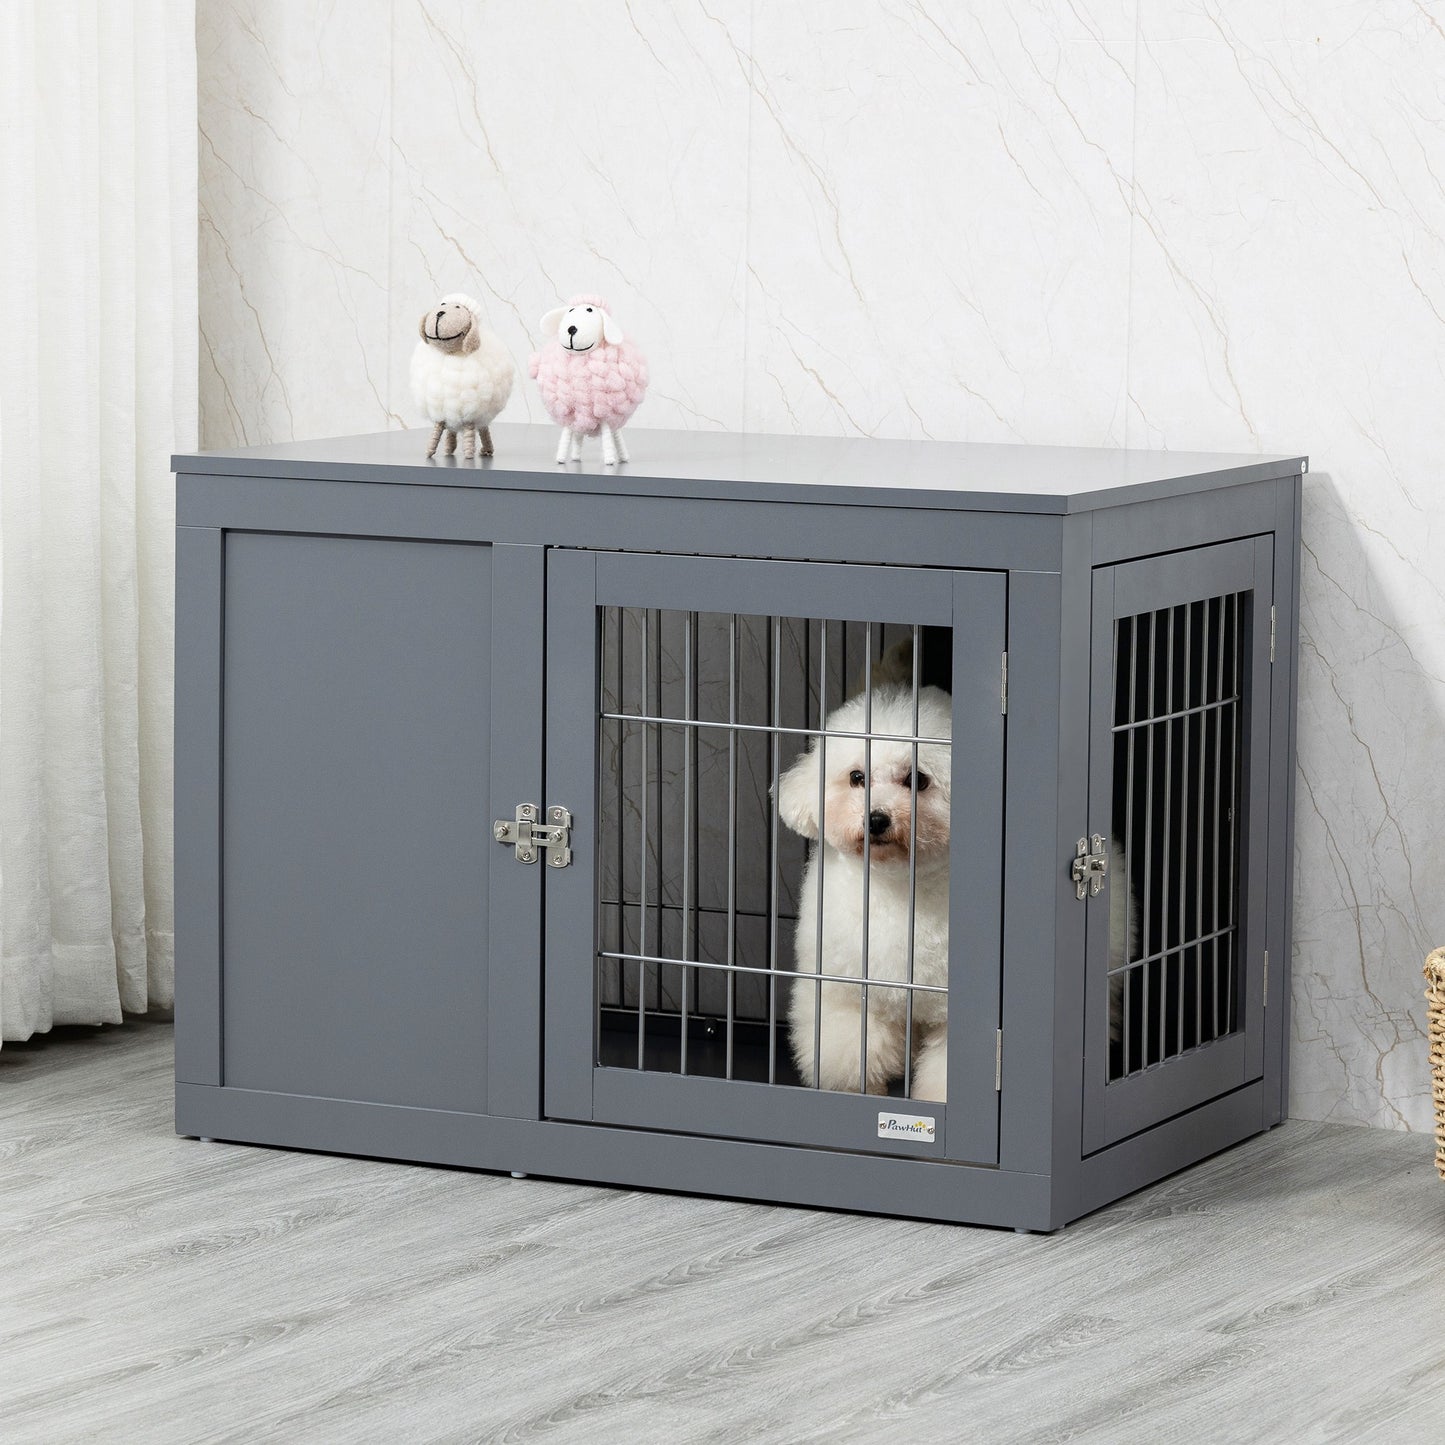 PawHut Furniture Style Dog Crate, End Table Pet Cage Kennel, Indoor Decorative Puppy House, with Double Doors, Locks, for Small & Medium Dogs, Grey